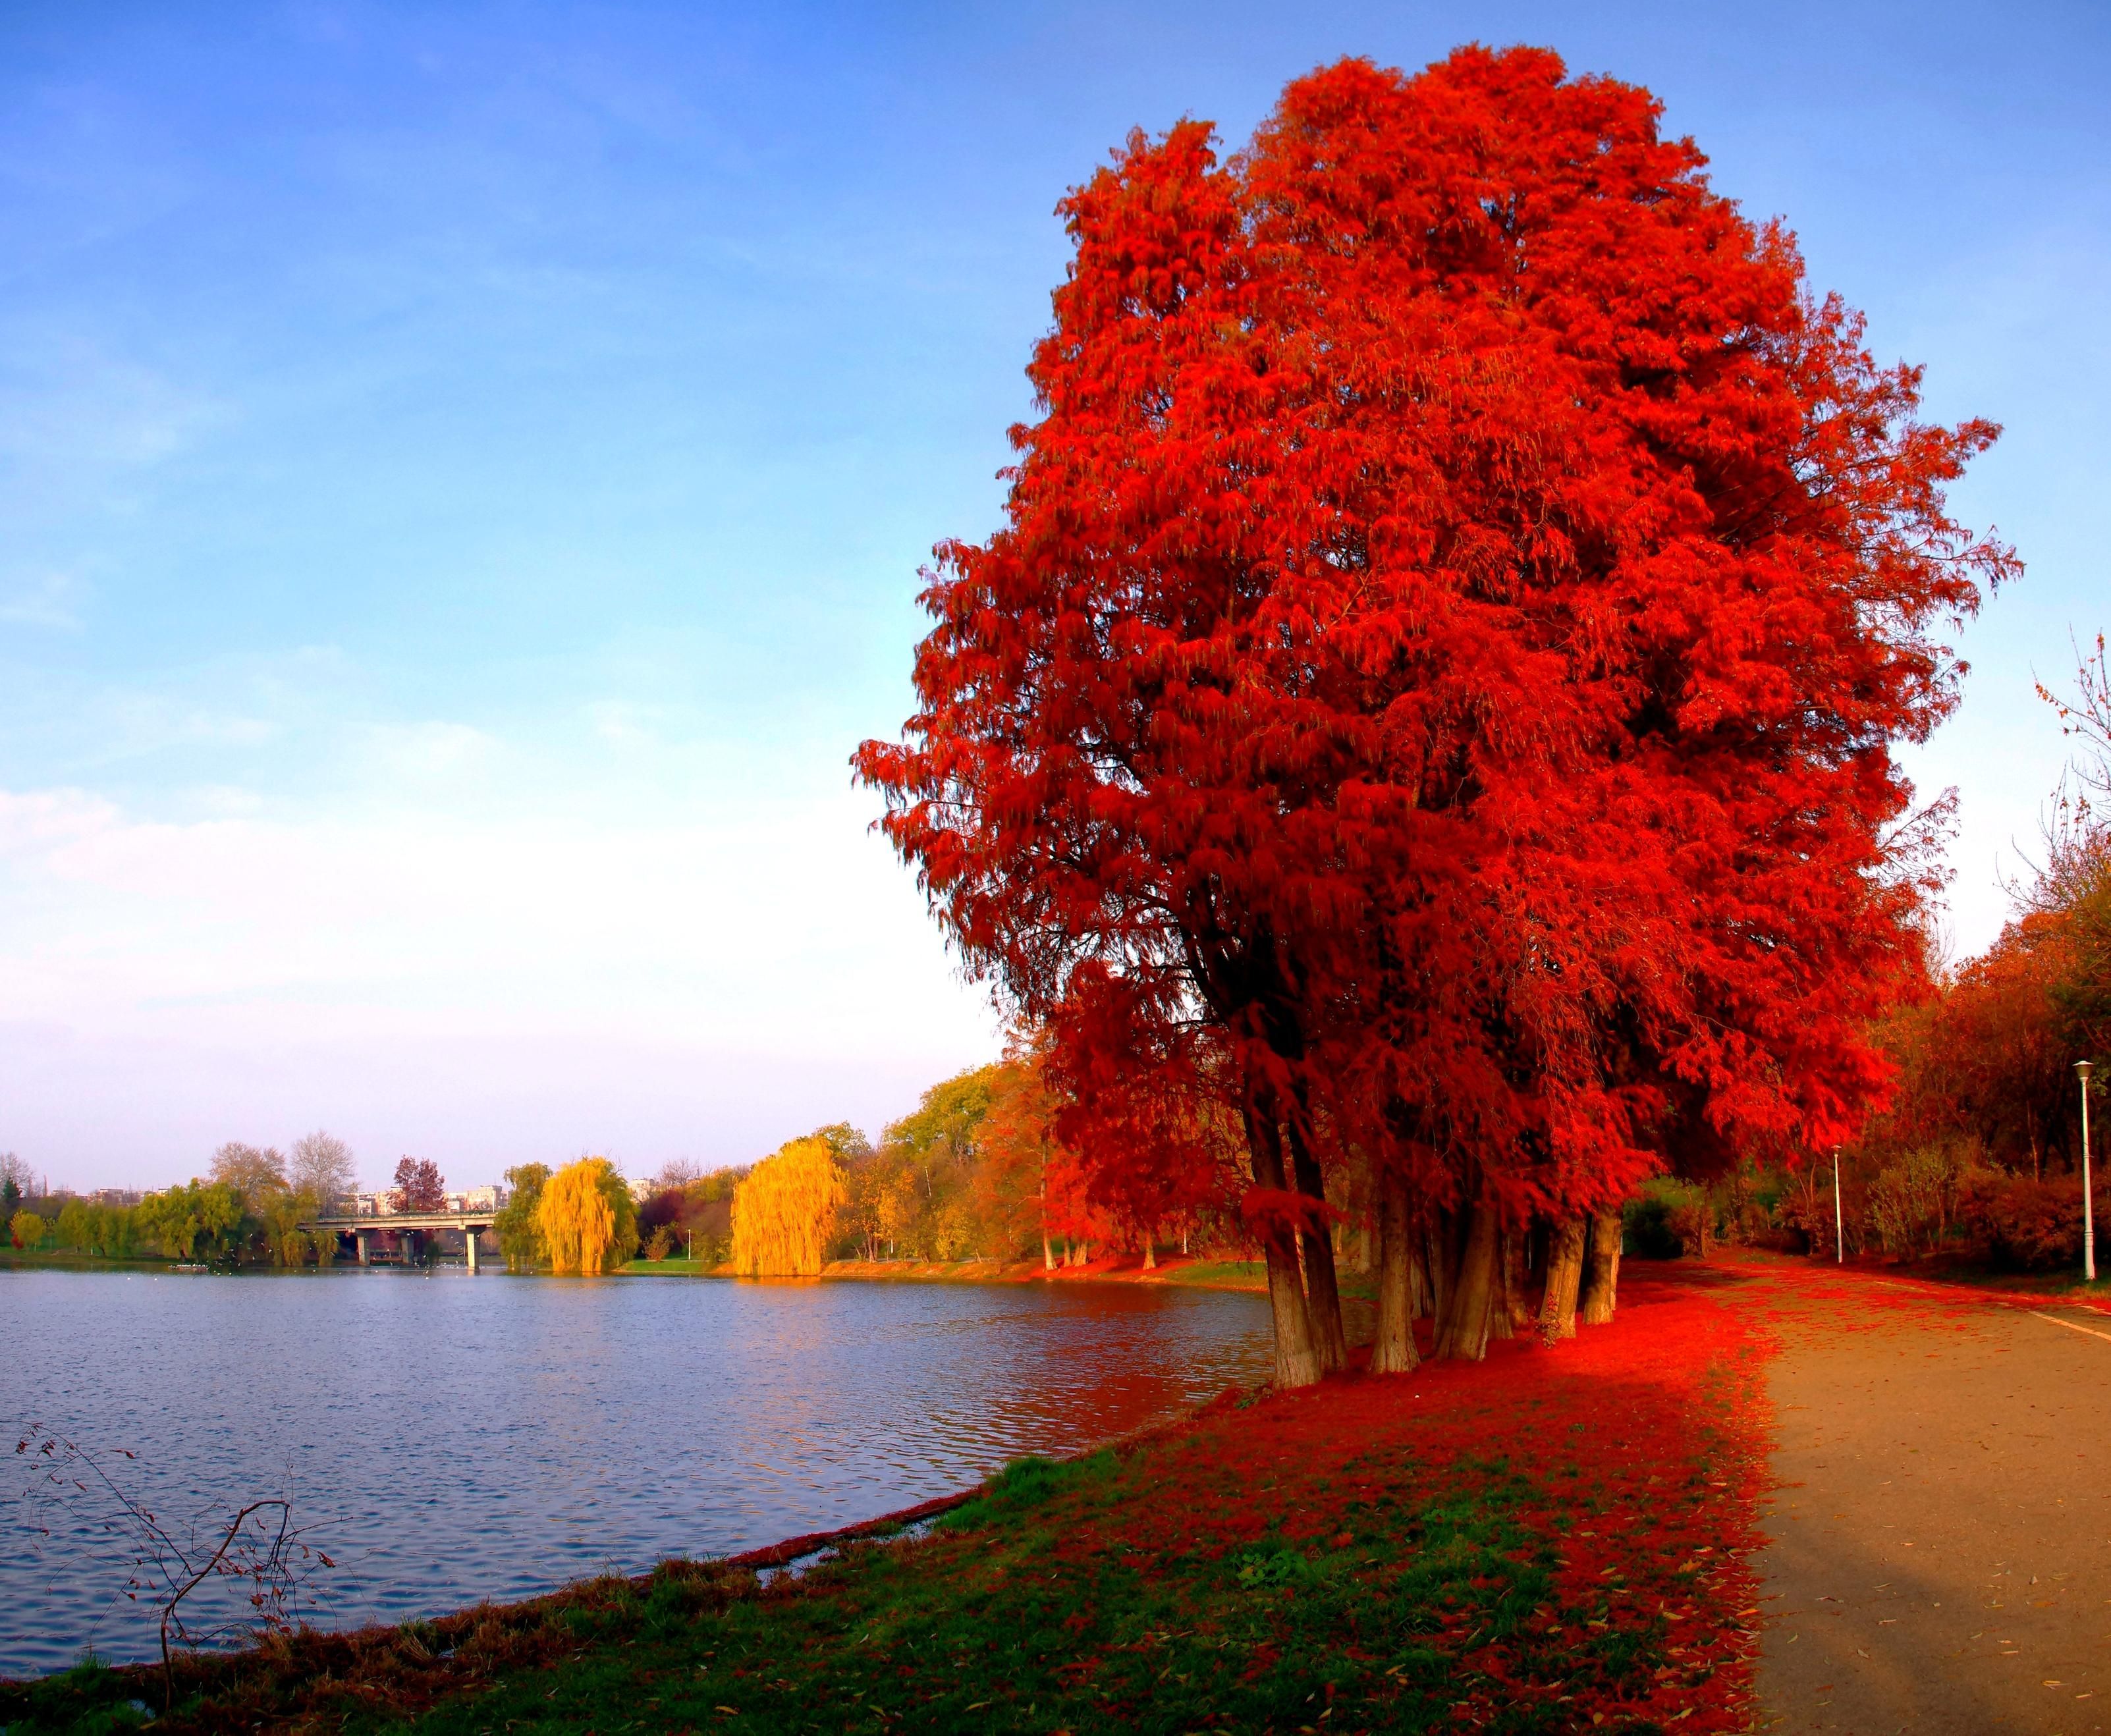 Wonderful Autumn In Red Download Wallpaper For Mobile « Pin HD Wallpaper. Beach wallpaper, Autumn lake, Nature